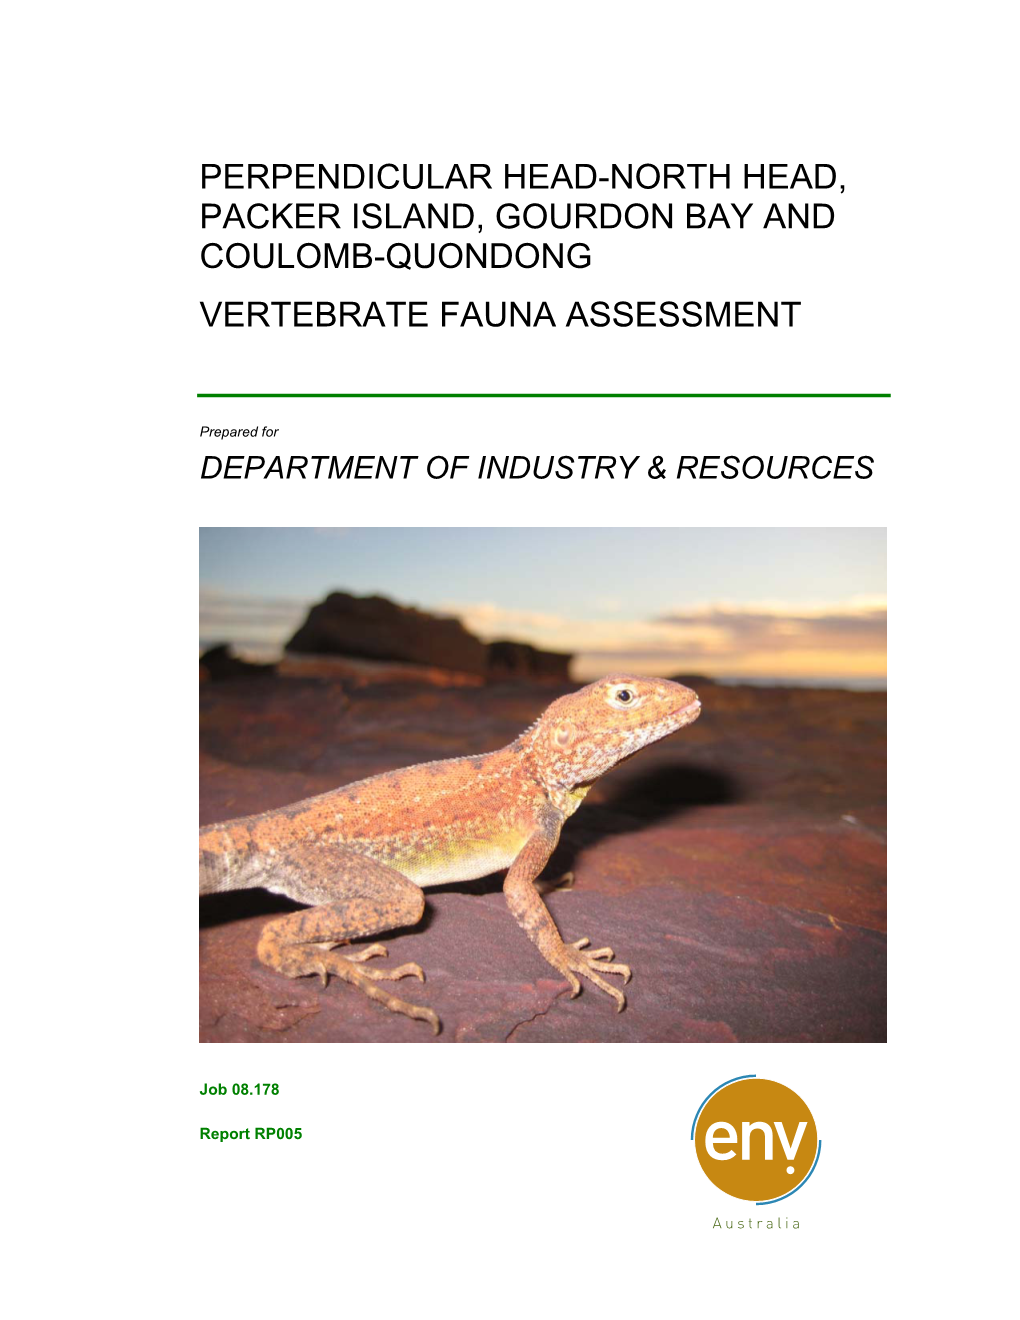 Perpendicular Head-North Head, Packer Island, Gourdon Bay and Coulomb-Quondong Vertebrate Fauna Assessment